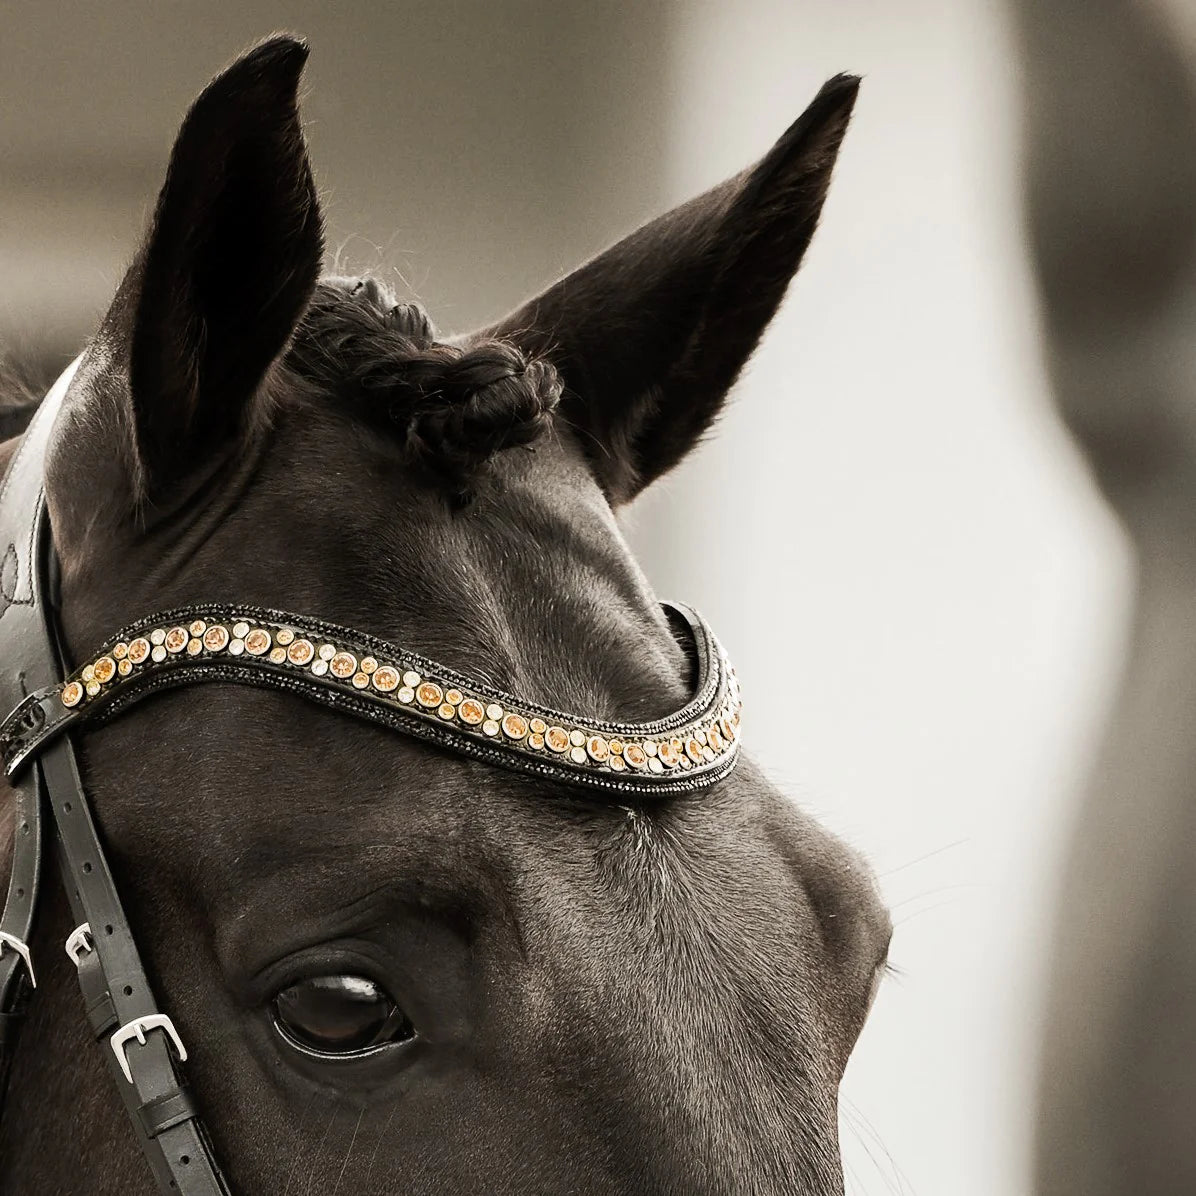 Lumiere Ariana Crystal Browband, black Leather